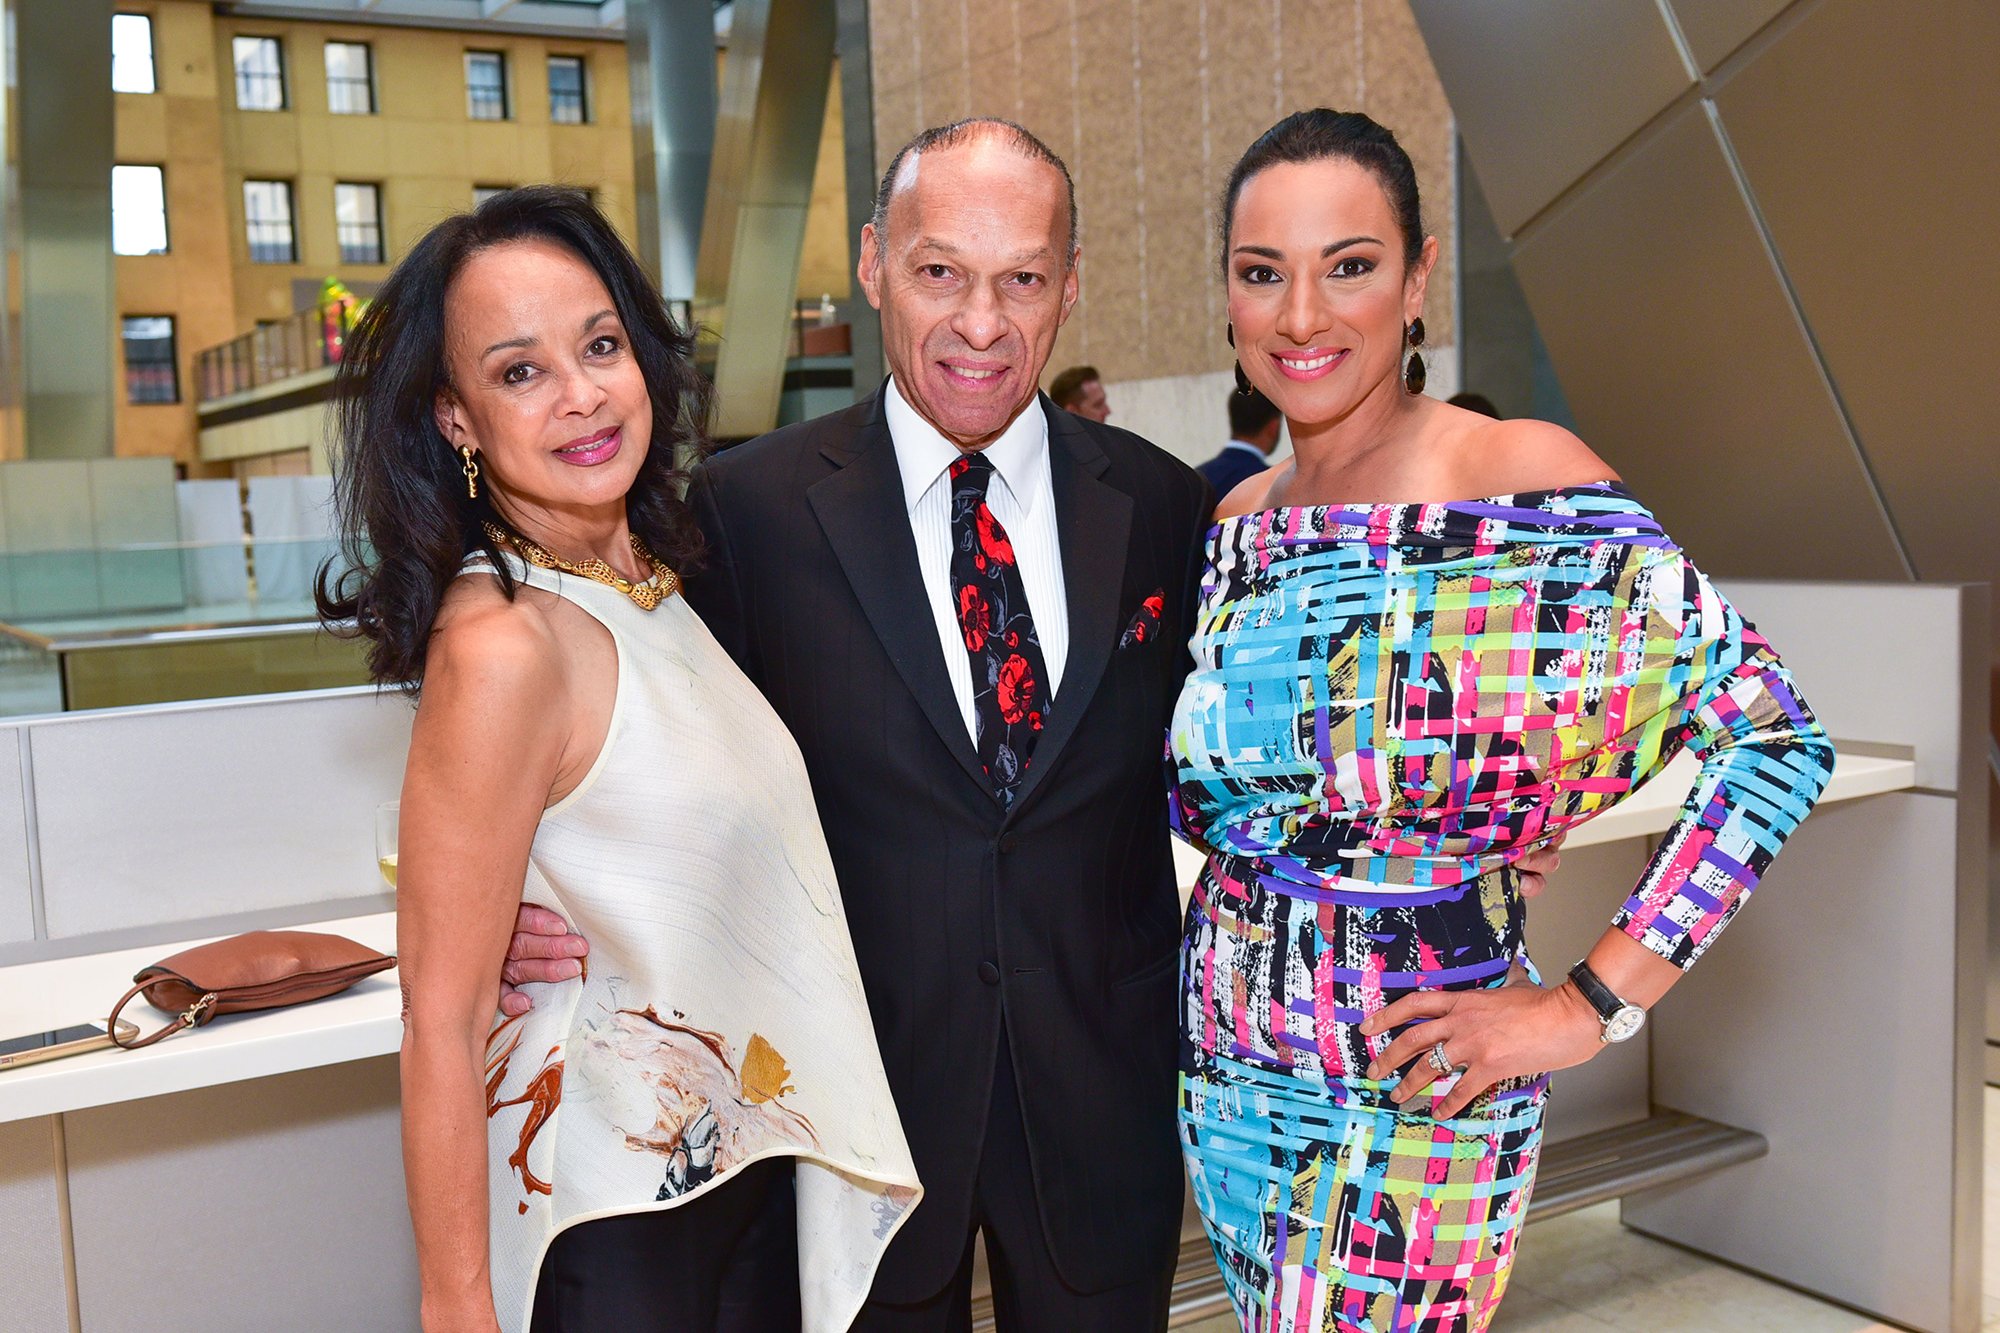 Alicia Bythewood, Daniel Bythewood Sr., and Michelle Miller at the Abstracted Black Tie Dinner Hosted by Pamela Joyner & Fred Giuffrida. Sean Zanni, © Patrick McMullan.